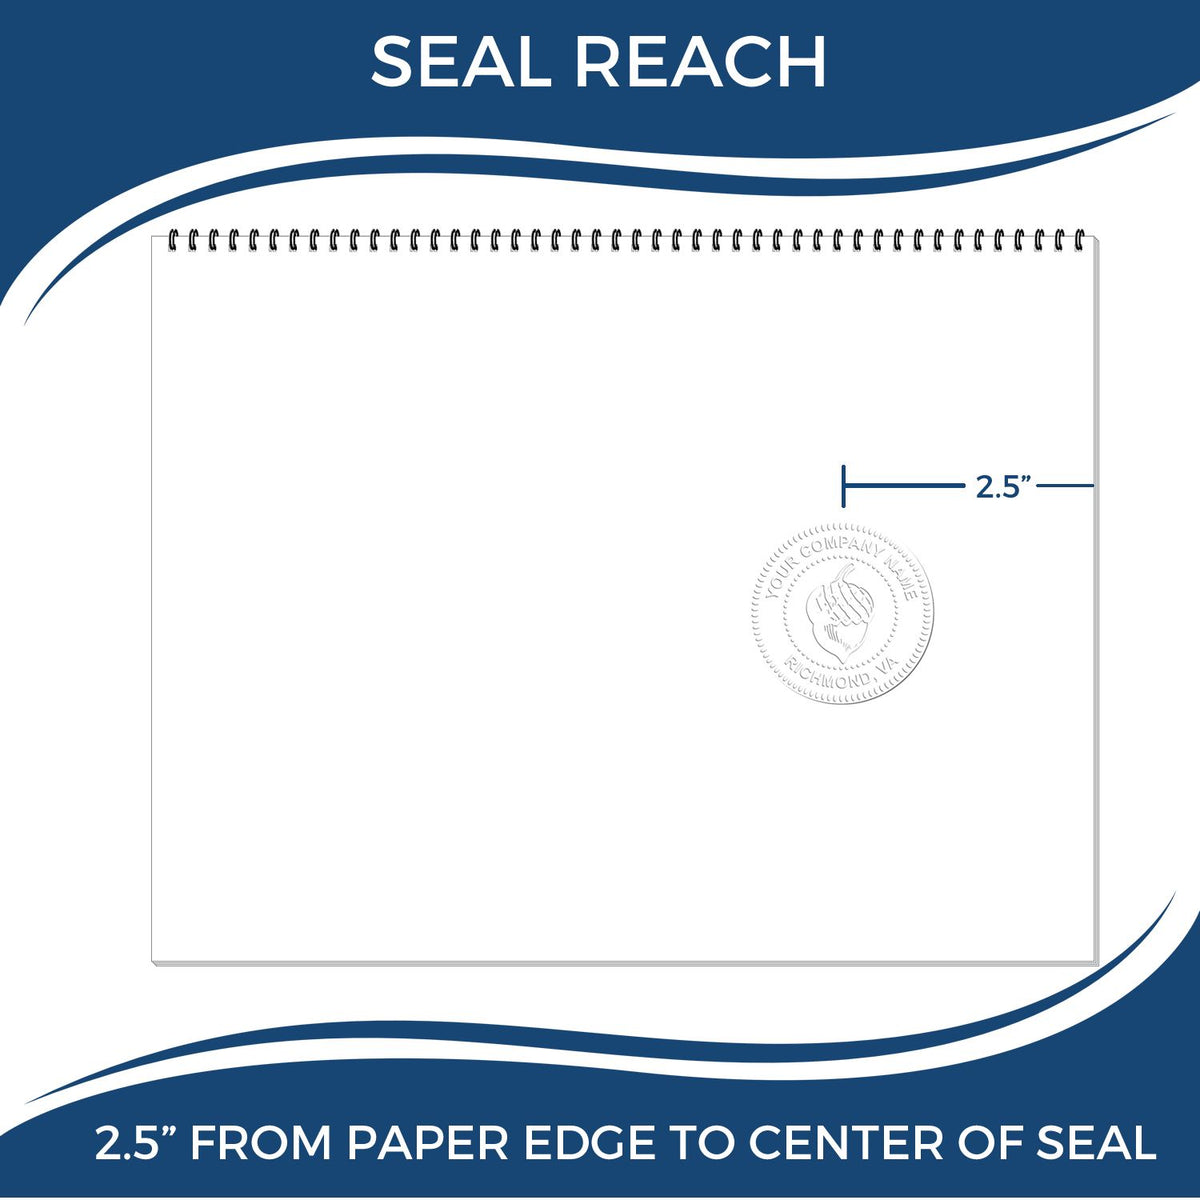 An infographic showing the seal reach which is represented by a ruler and a miniature seal image of the Heavy Duty Cast Iron Arizona Land Surveyor Seal Embosser